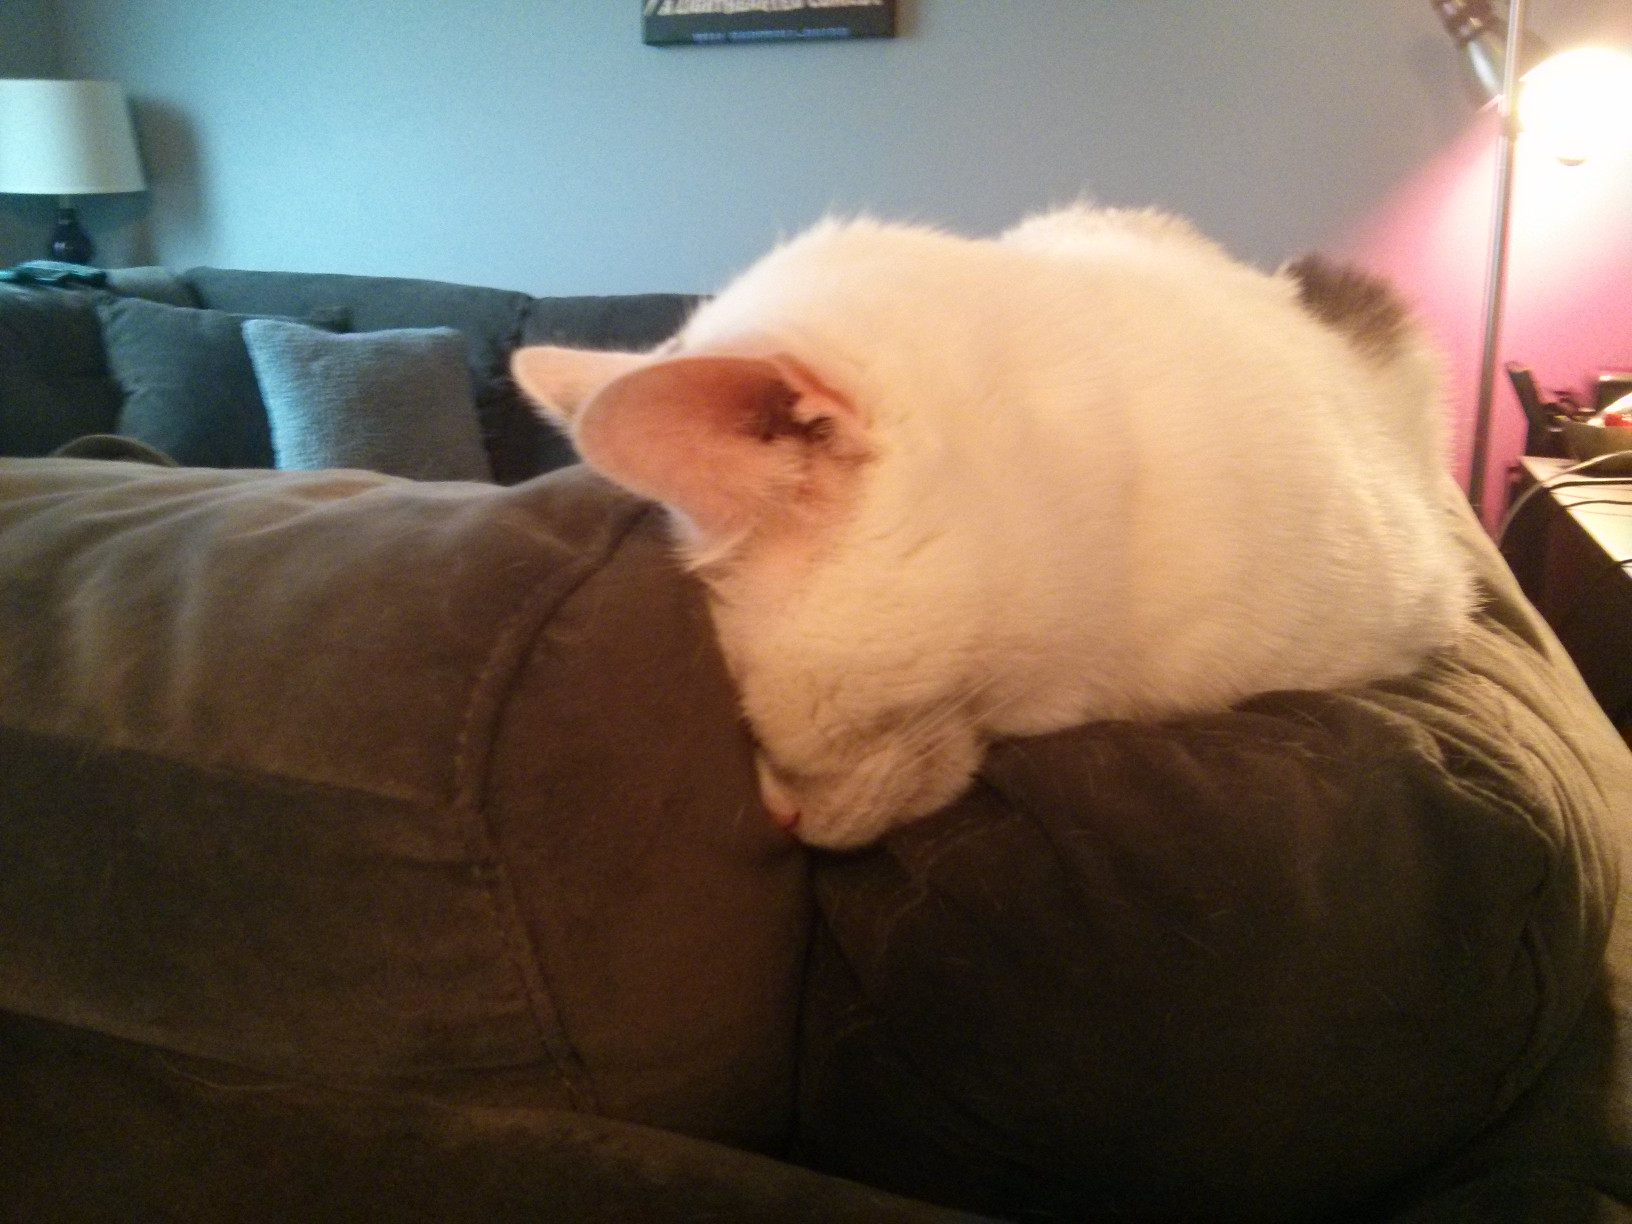 A cat with his face pressed against a couch cushion.